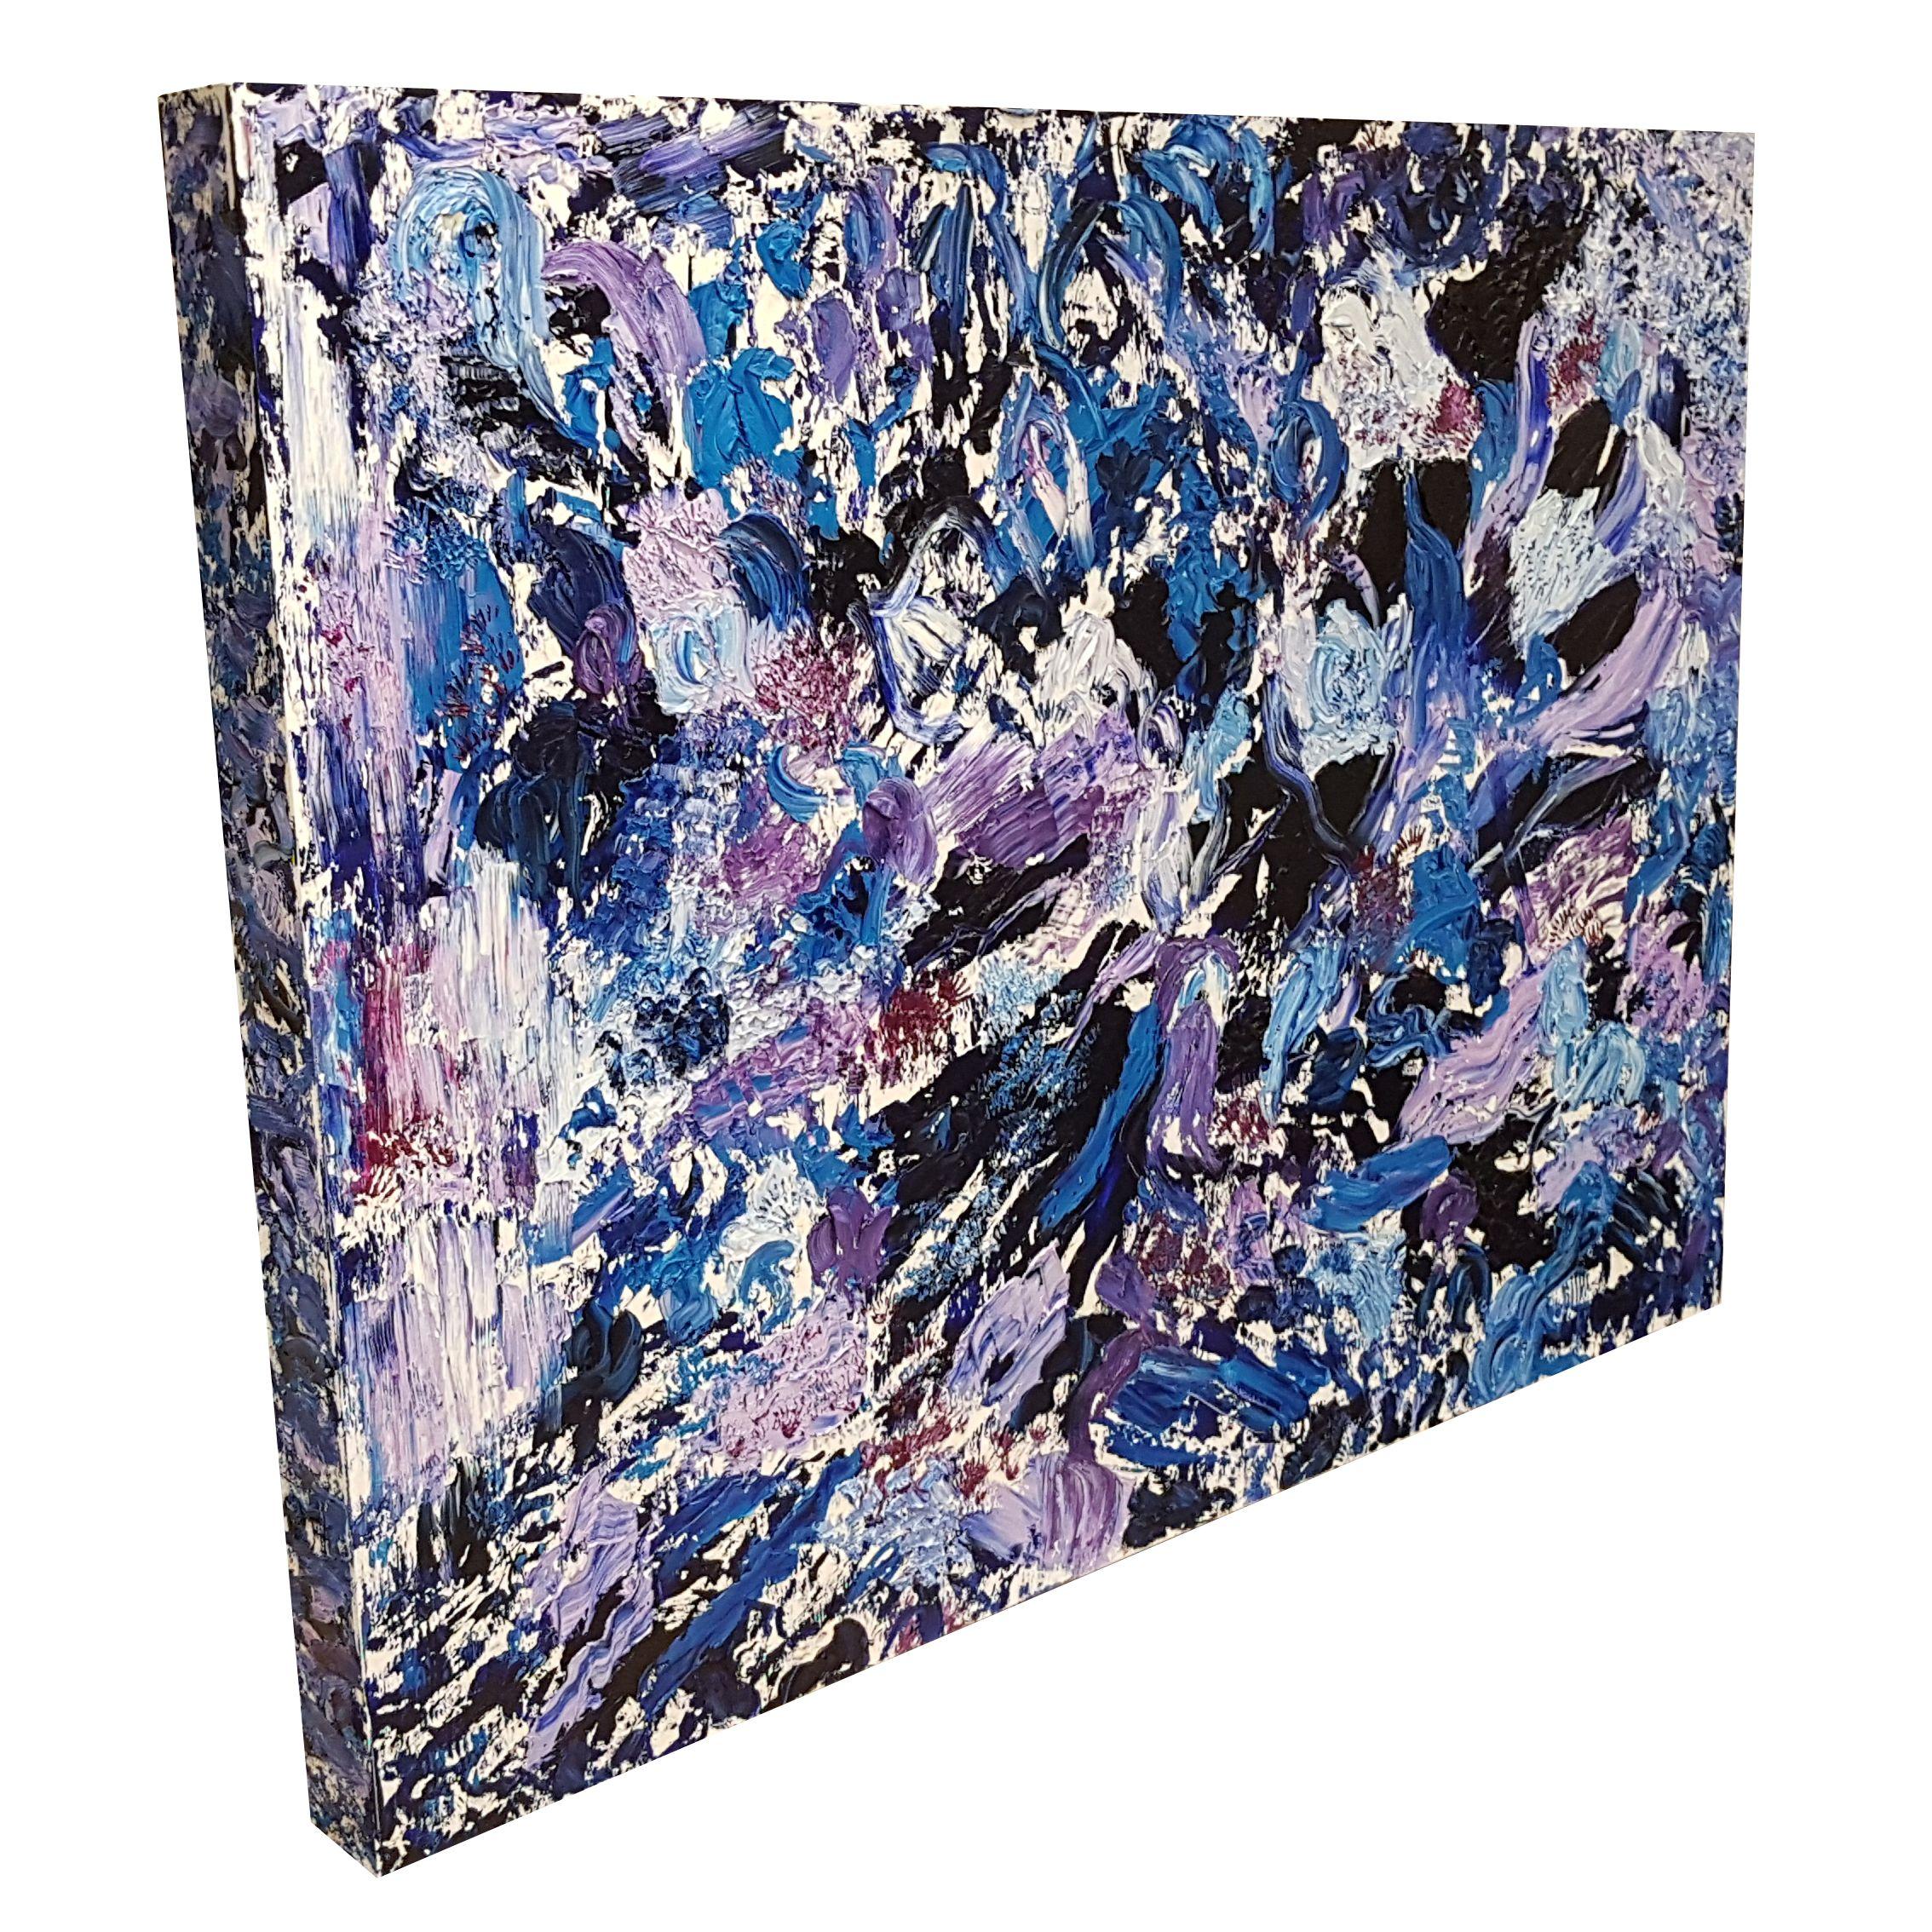 Impasto-style painting in white, blue, and violet tones created with palette knives in a bold abstract expressionism style that features high-quality oil paints with thick textured shapes and layers. The artwork is painted on a custom-made wooden